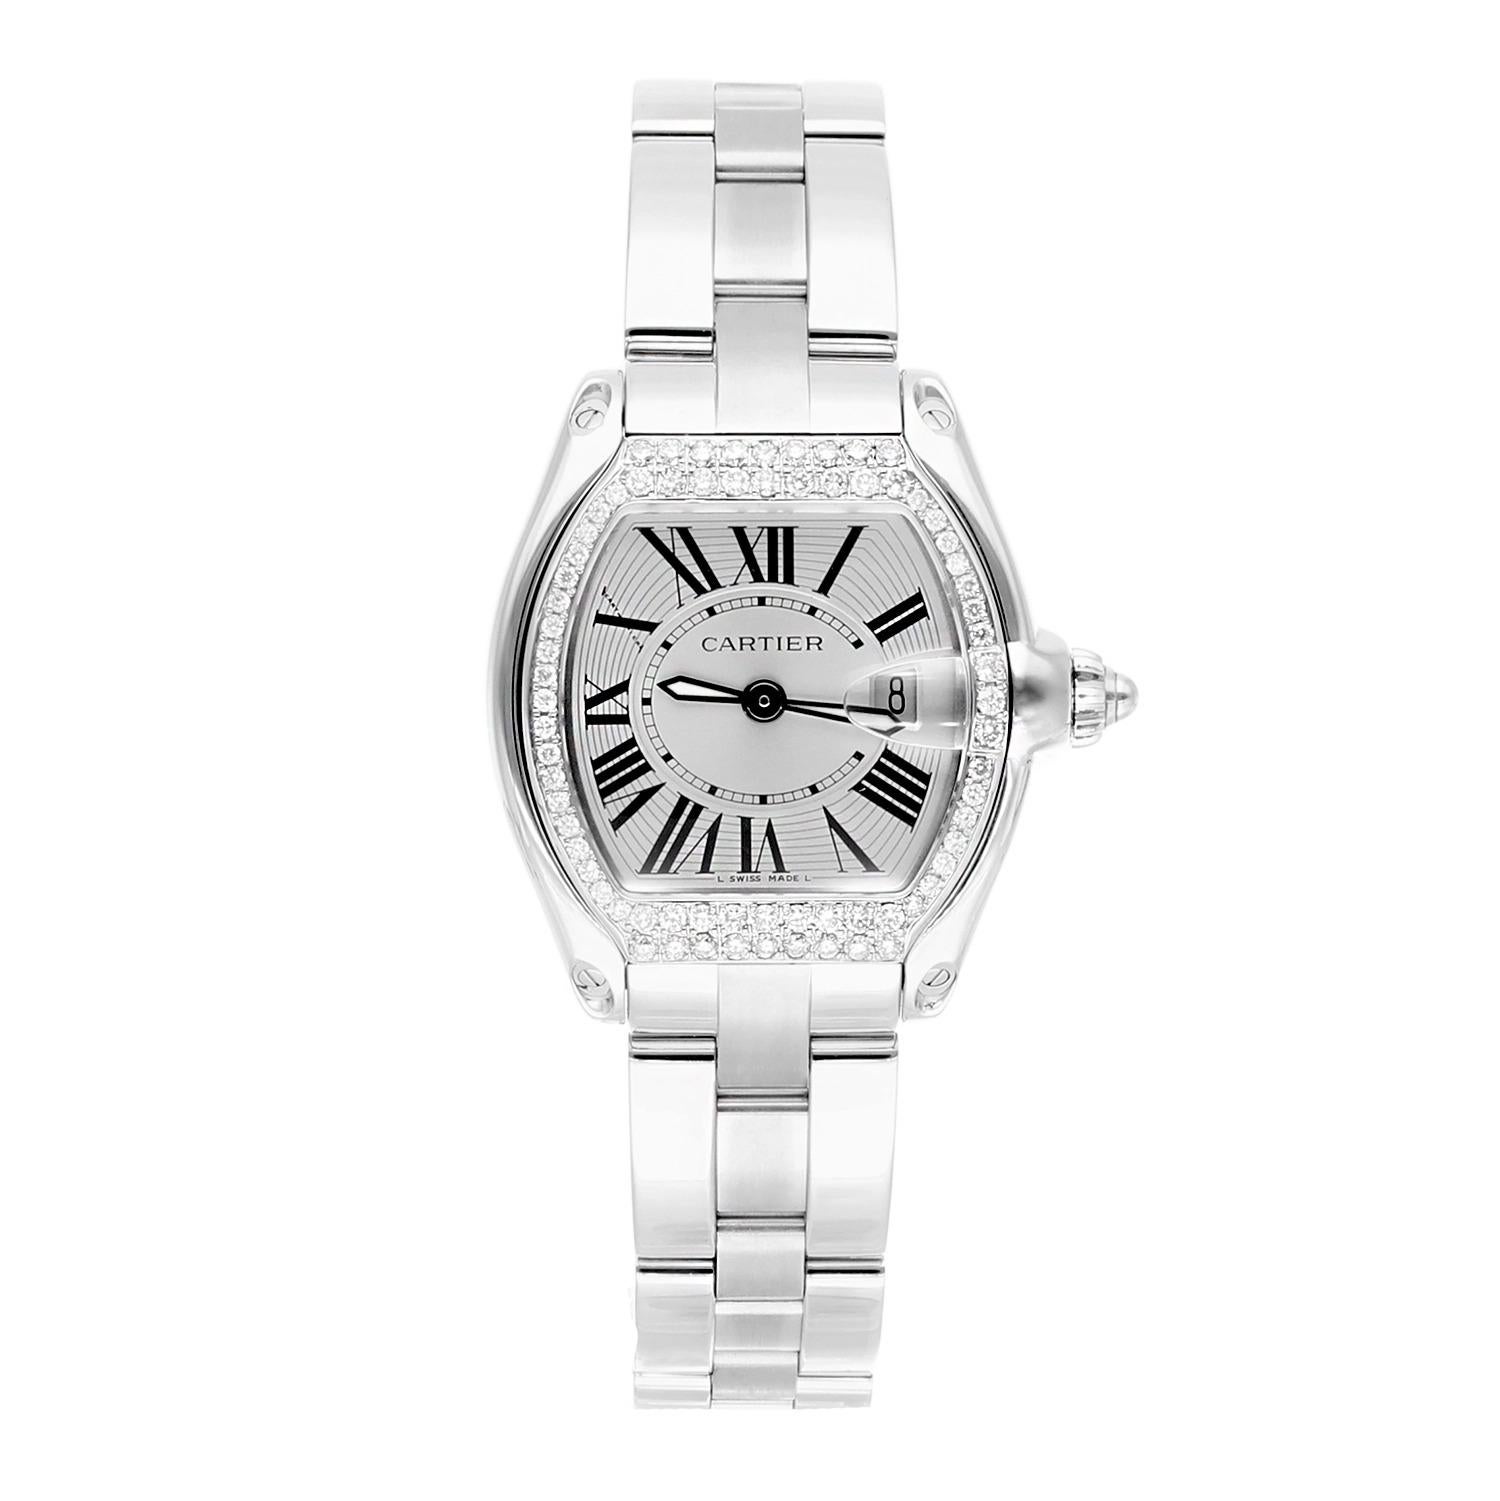 Cartier Roadster Small Ladies Silver Dial Stainless Steel Watch with Diamond Bezel
This watch has been professionally polished, serviced and is in excellent overall condition. There are absolutely no visible scratches or blemishes. Diamonds were